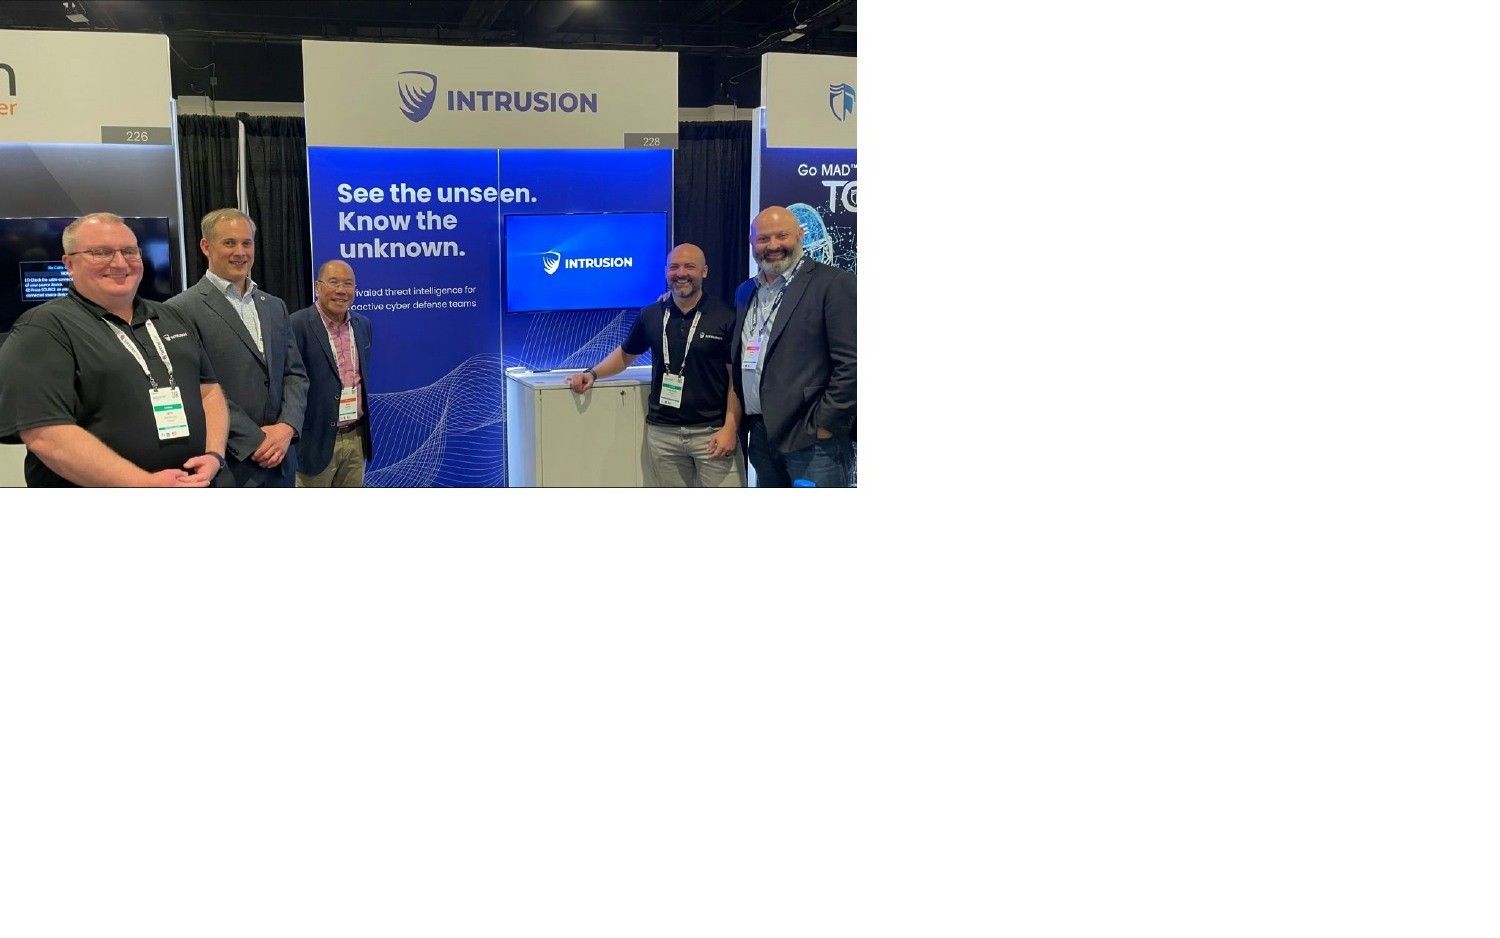 Our Sales and Technical leaders describing the risk associated with Cyber Threats in todays environment at Gartnersec.